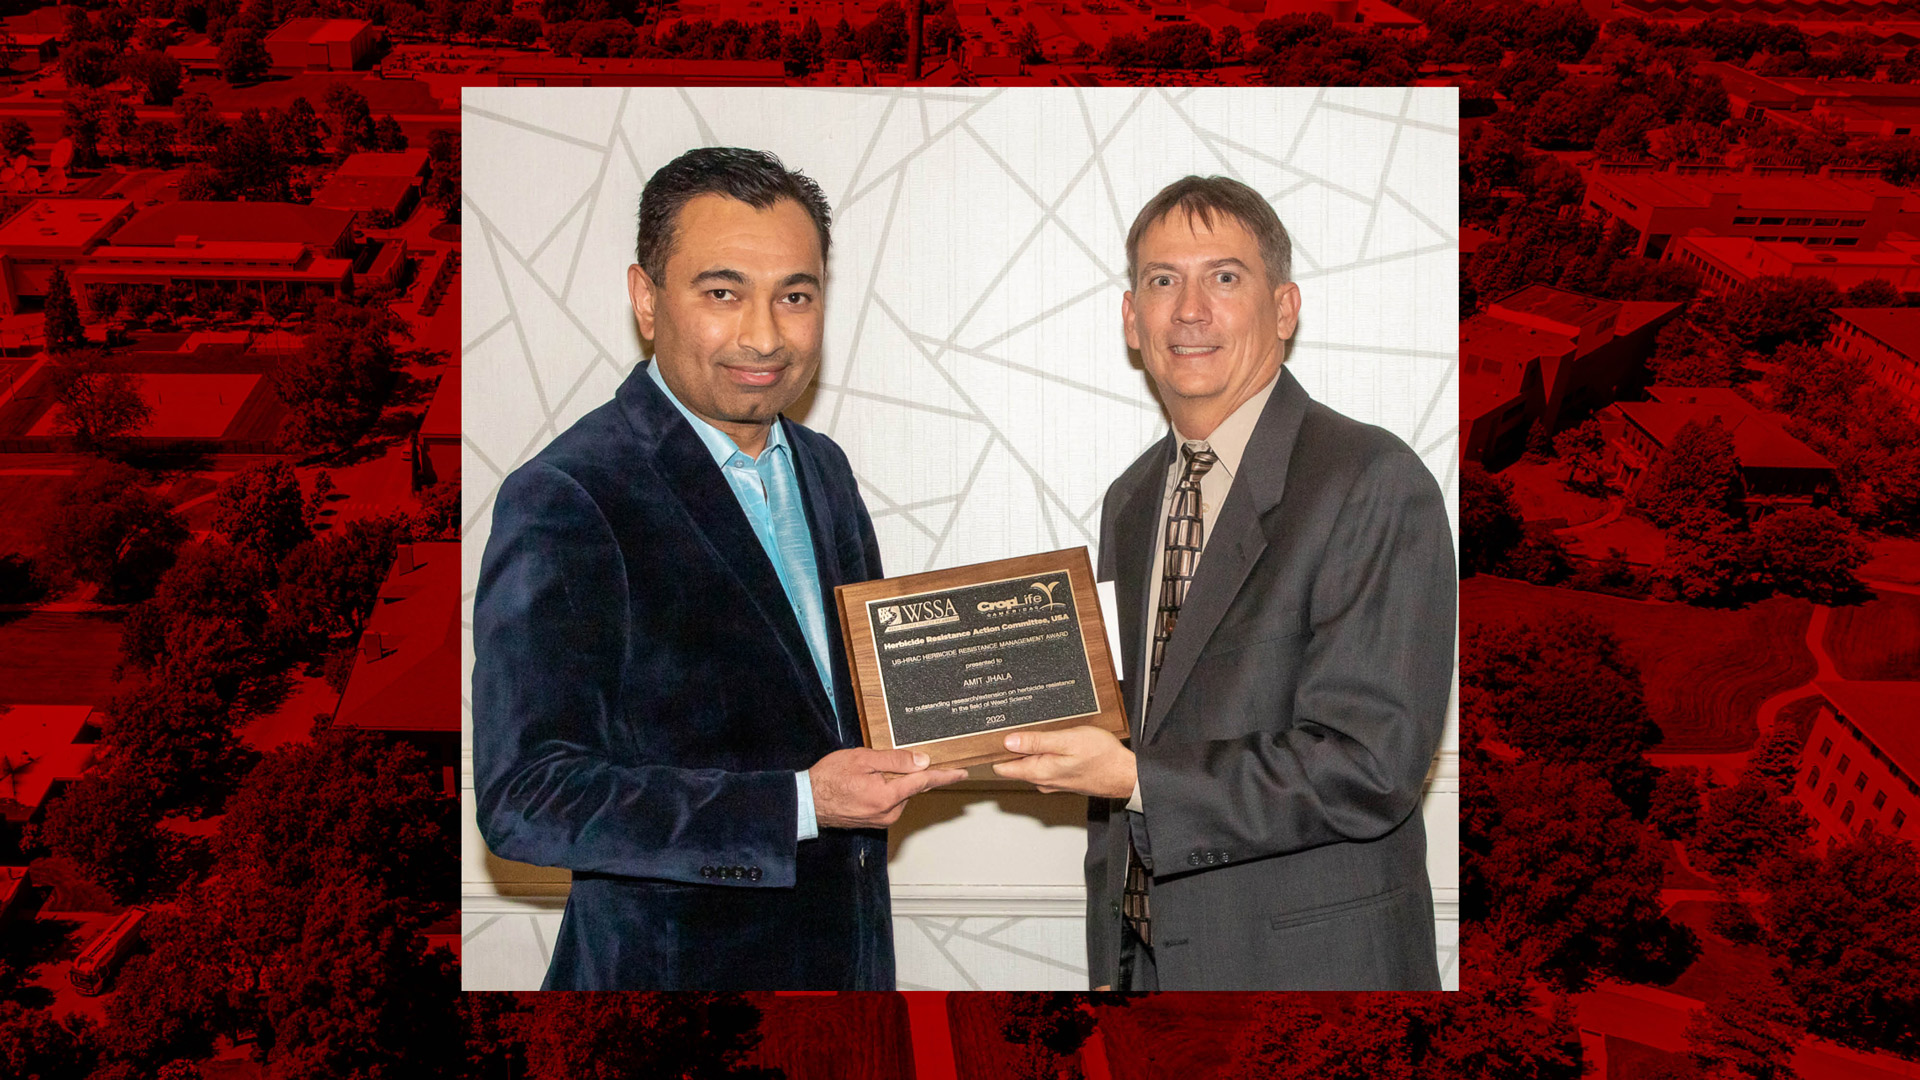 Amit Jhala, left, receives the WSSA Herbicide-Resistant Weed Management Award from Stanley Culpepper, professor and extension weed scientist at the University of Georgia and WSSA past-president.